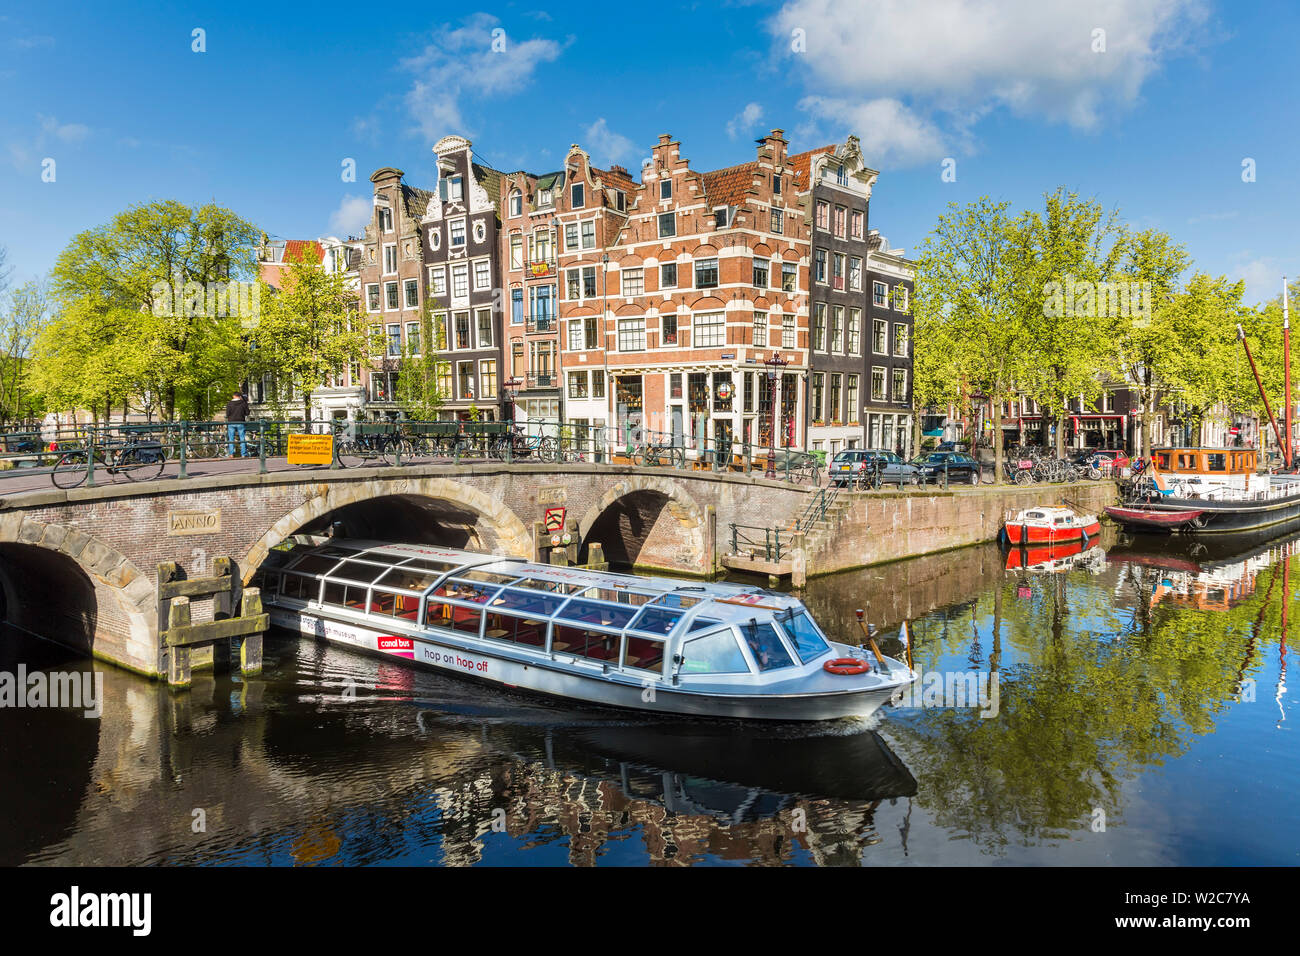 Canal, Amsterdam, Hollande, Pays-Bas Banque D'Images